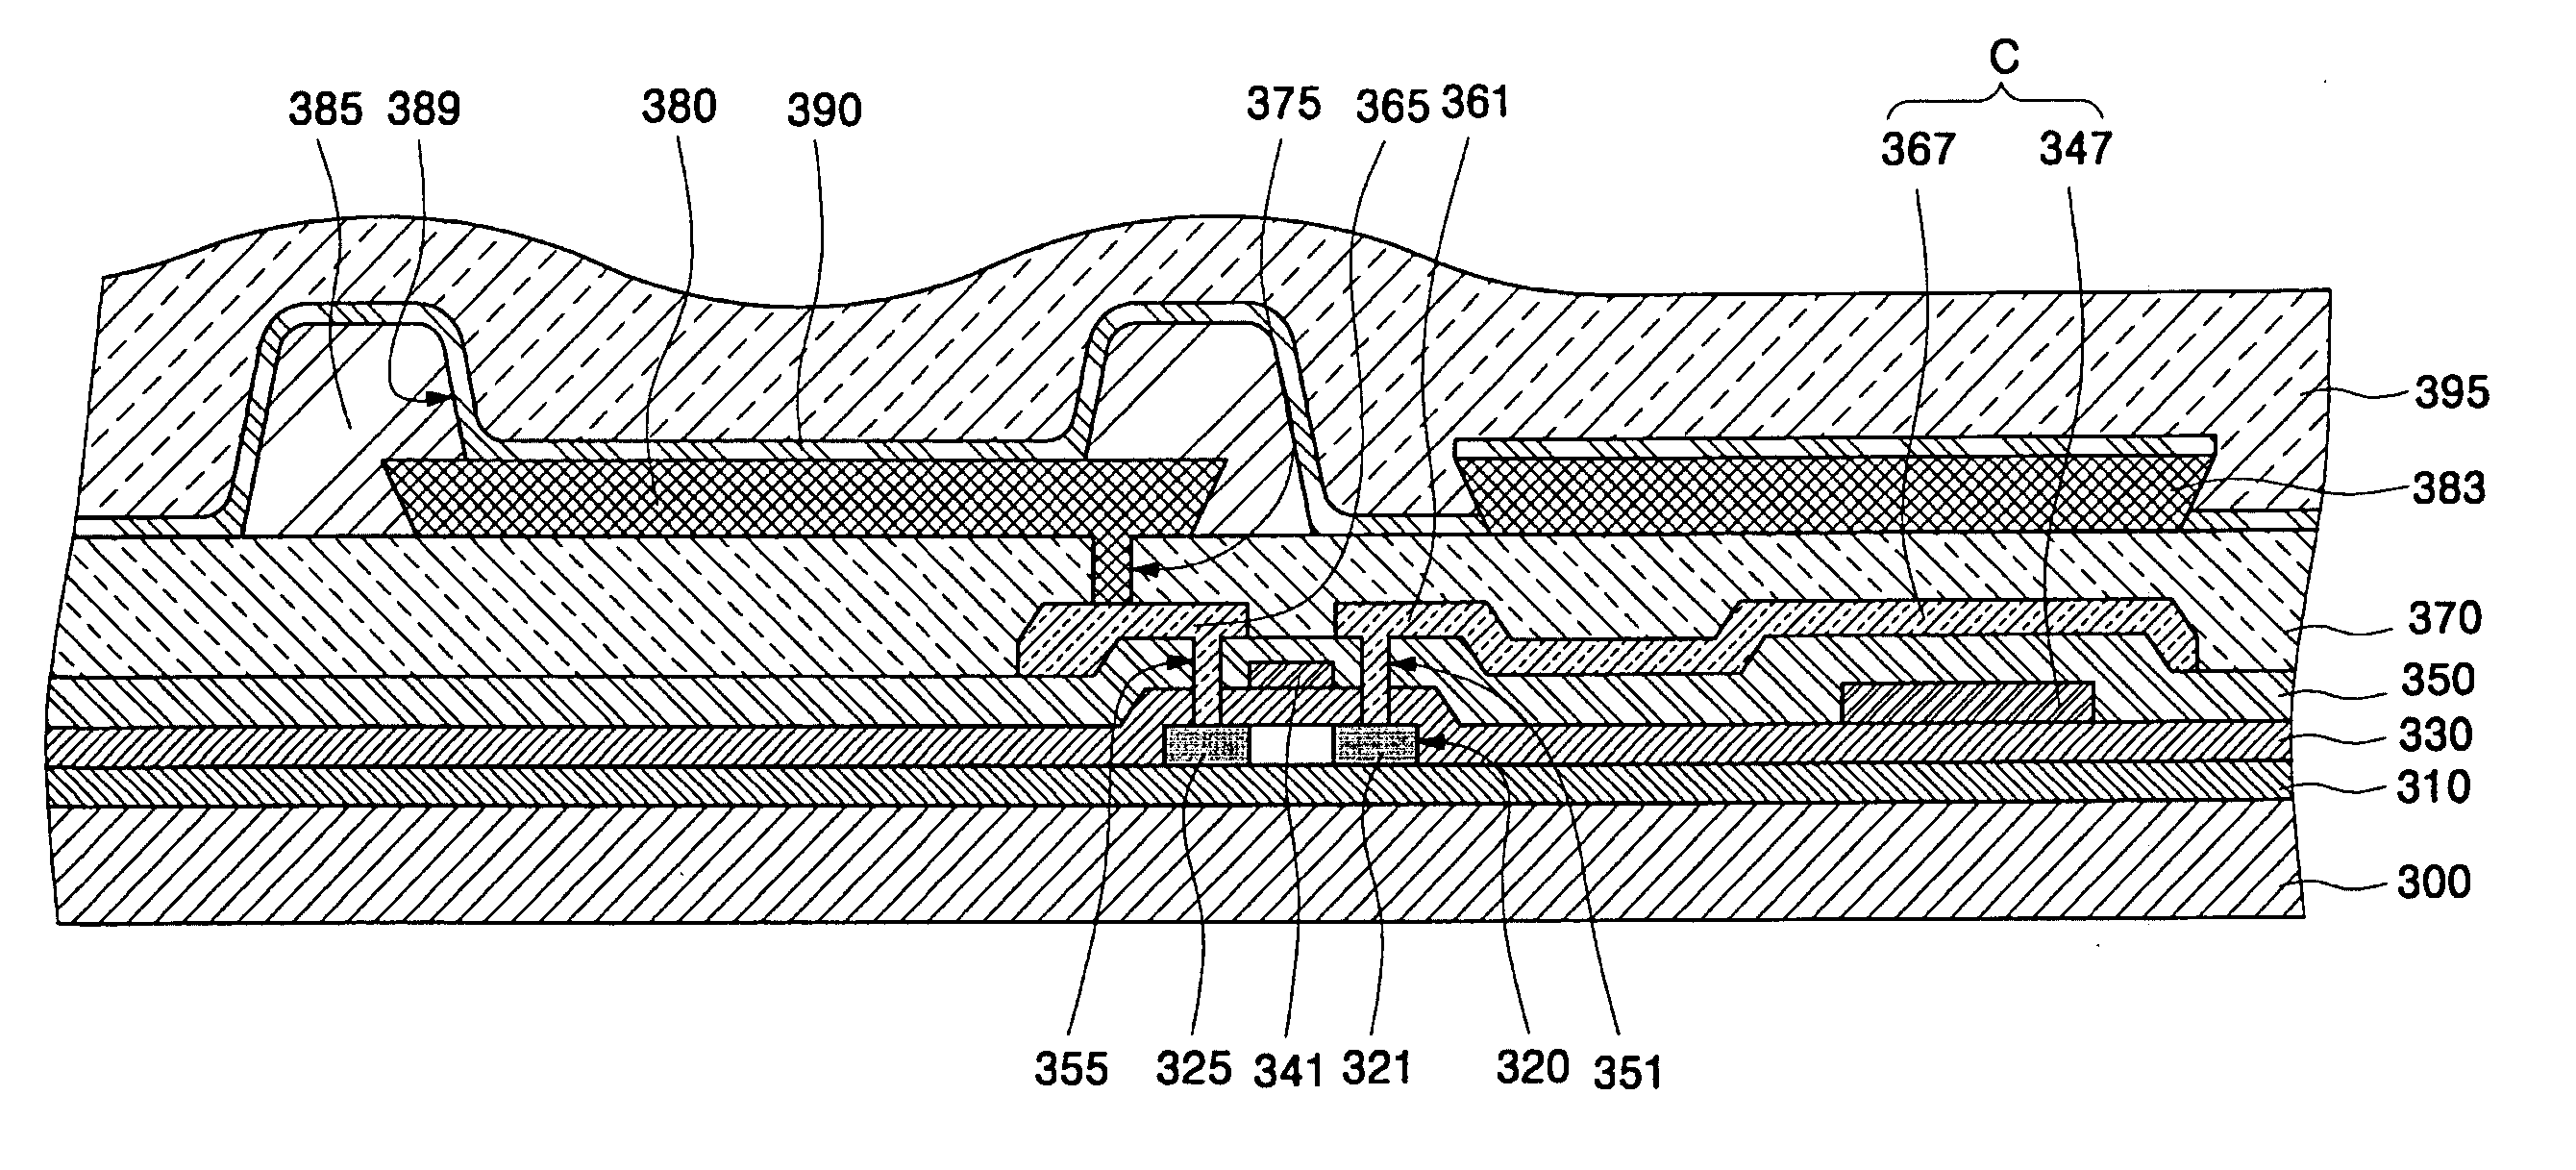 Top emission organic light emitting diode display using auxiliary electrode to prevent voltage drop of upper electrode and method of fabricating the same